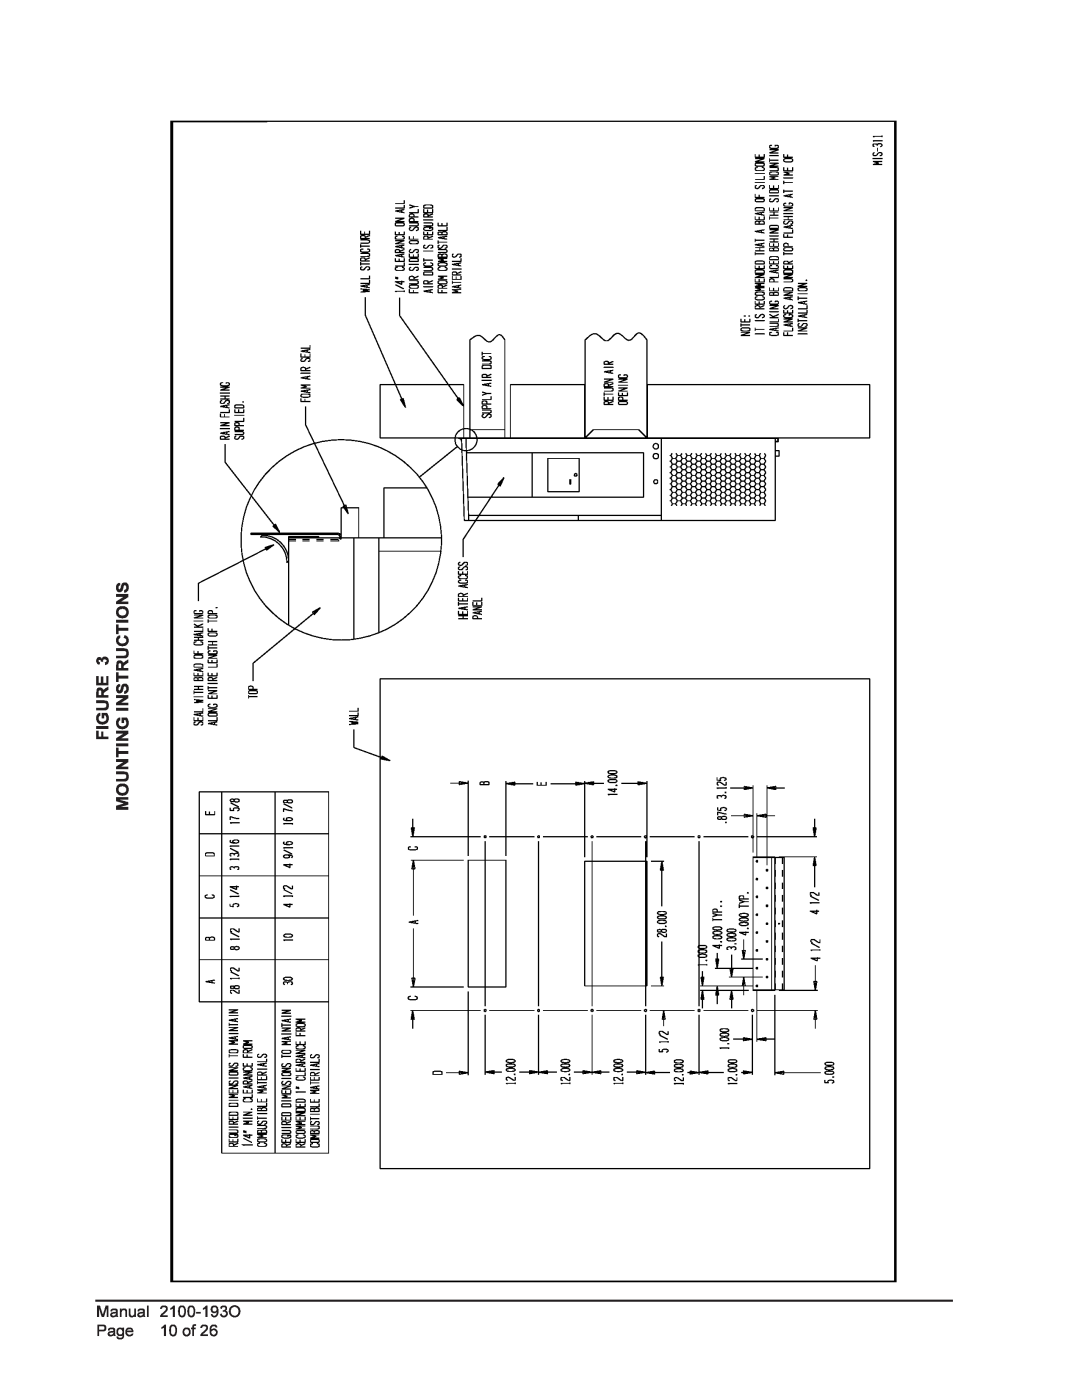 Bard WH-301, WH361 installation instructions Mounting Instructions, Manual, Page, 10 of 